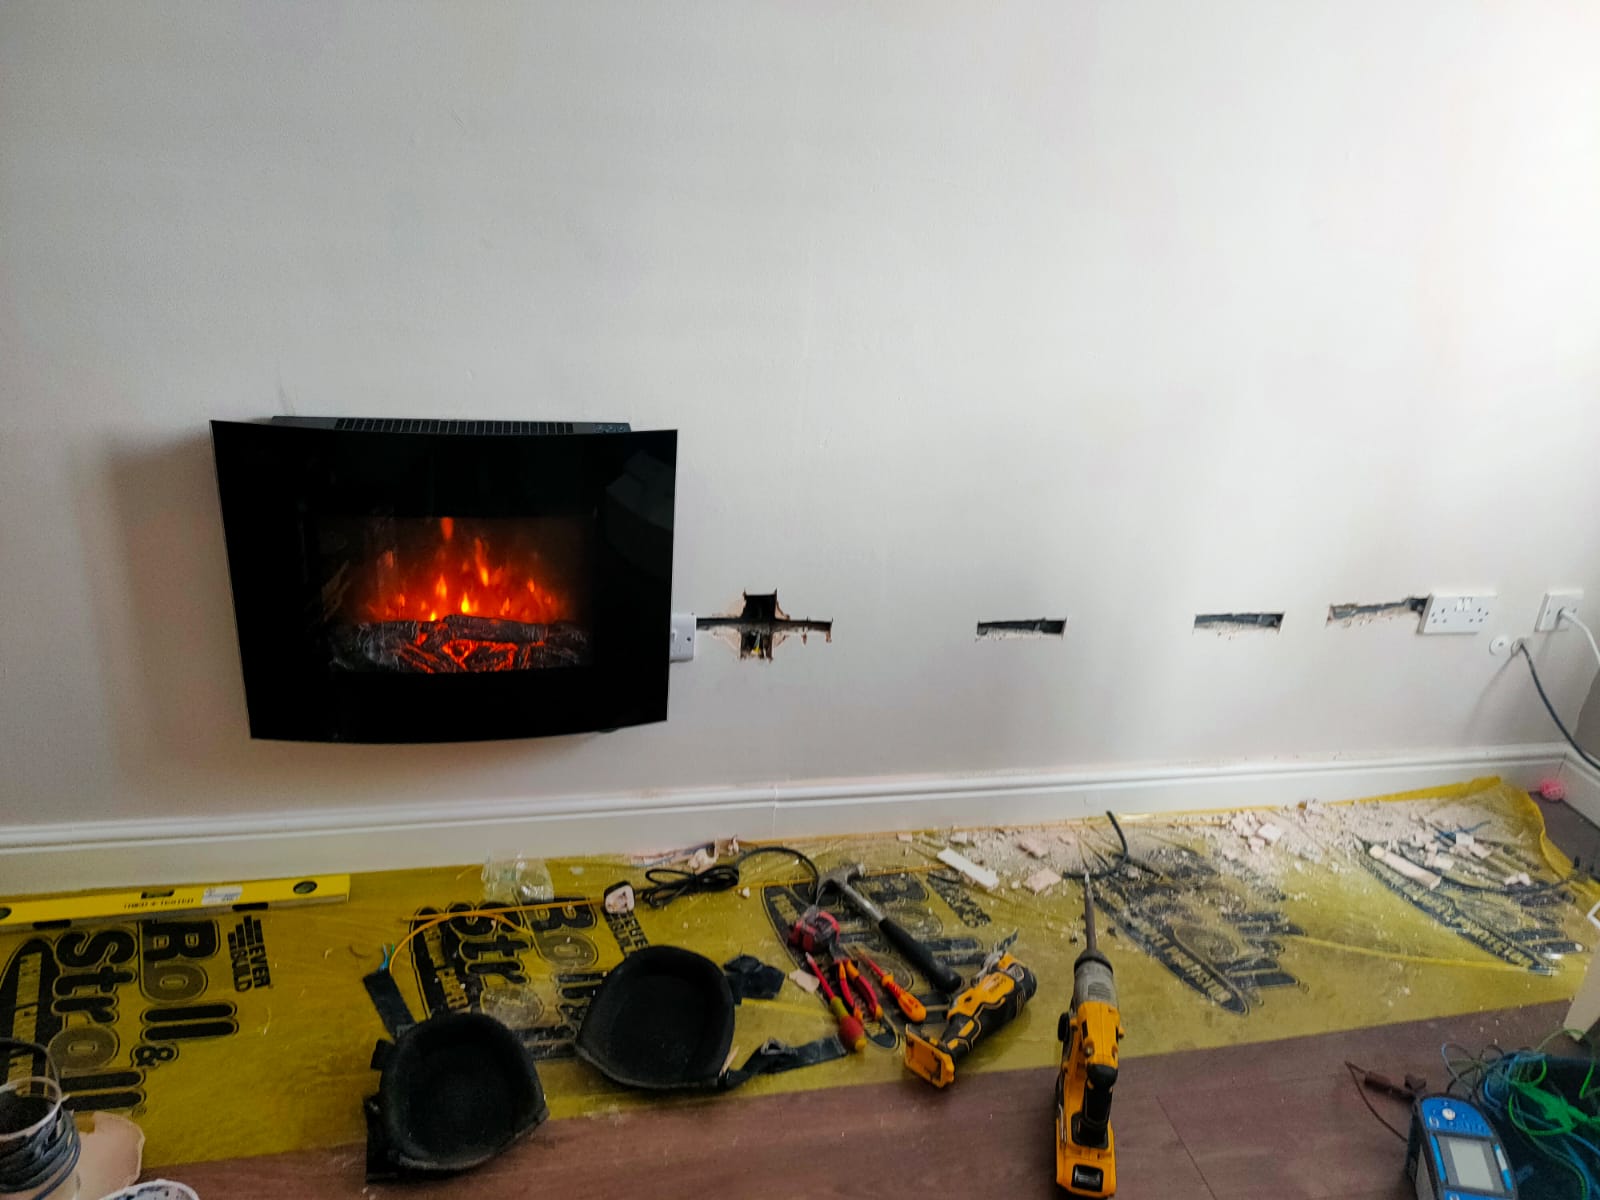 The fireplace is on the wall with precise holes placed into the wall